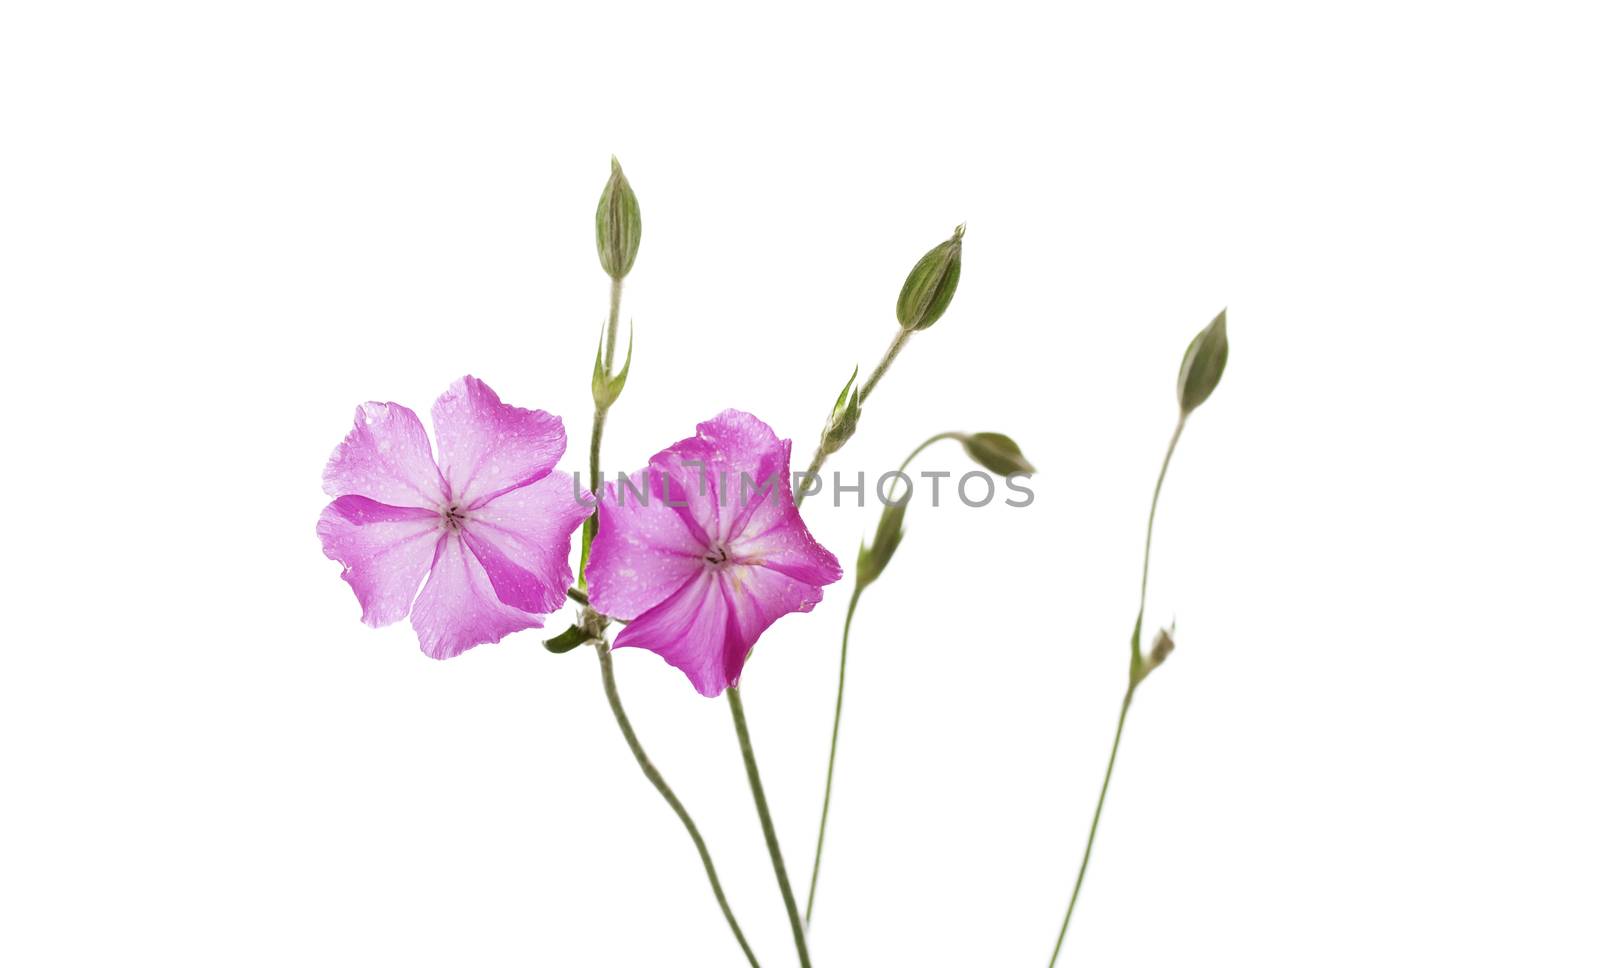 Dew drops on pink wild flowers isolated on white background